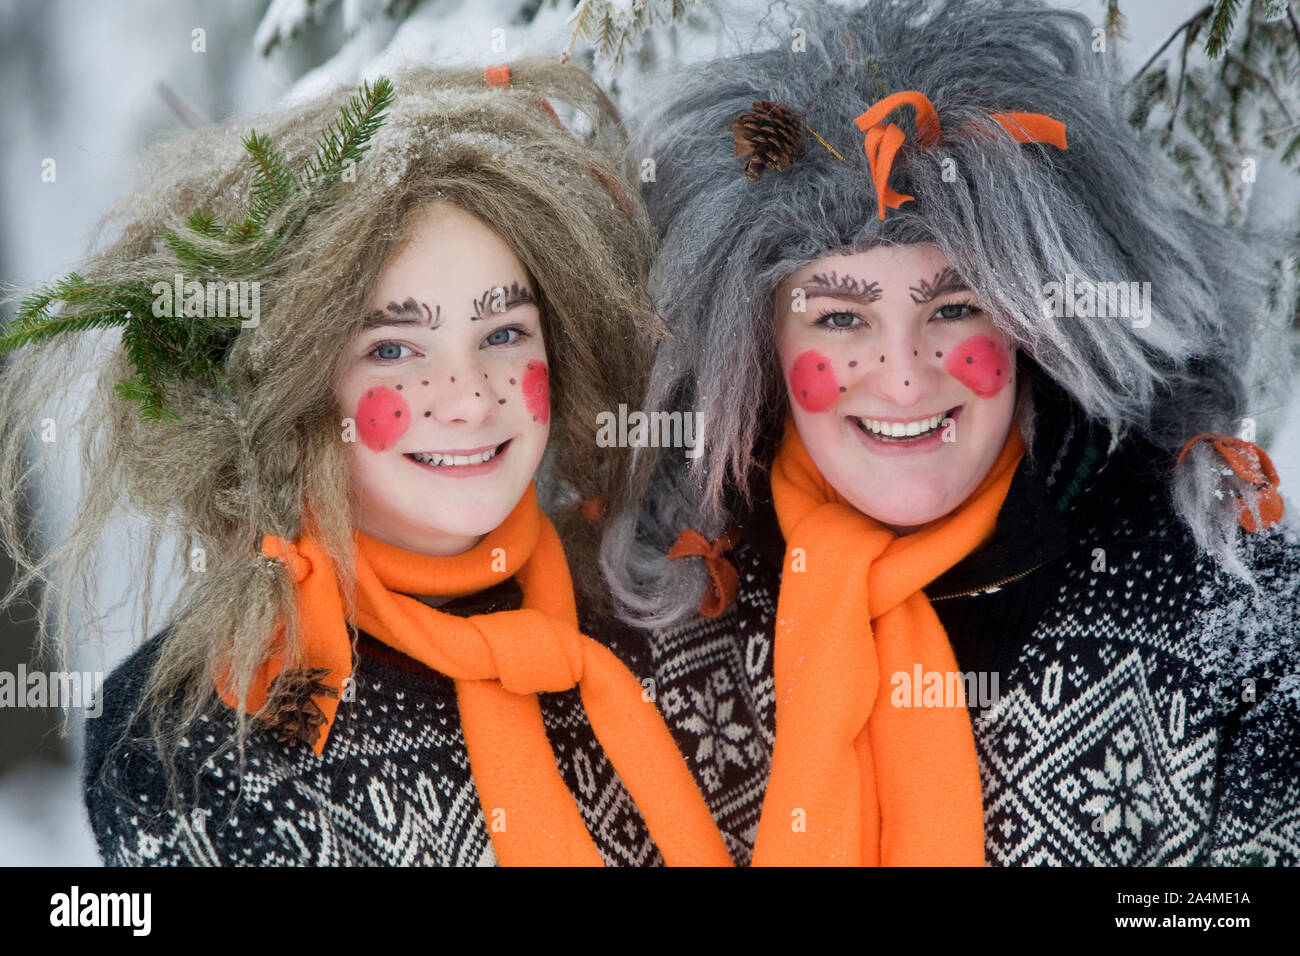 Girls In Costume Cheering At World Cup Skiing, Norway Stock Photo